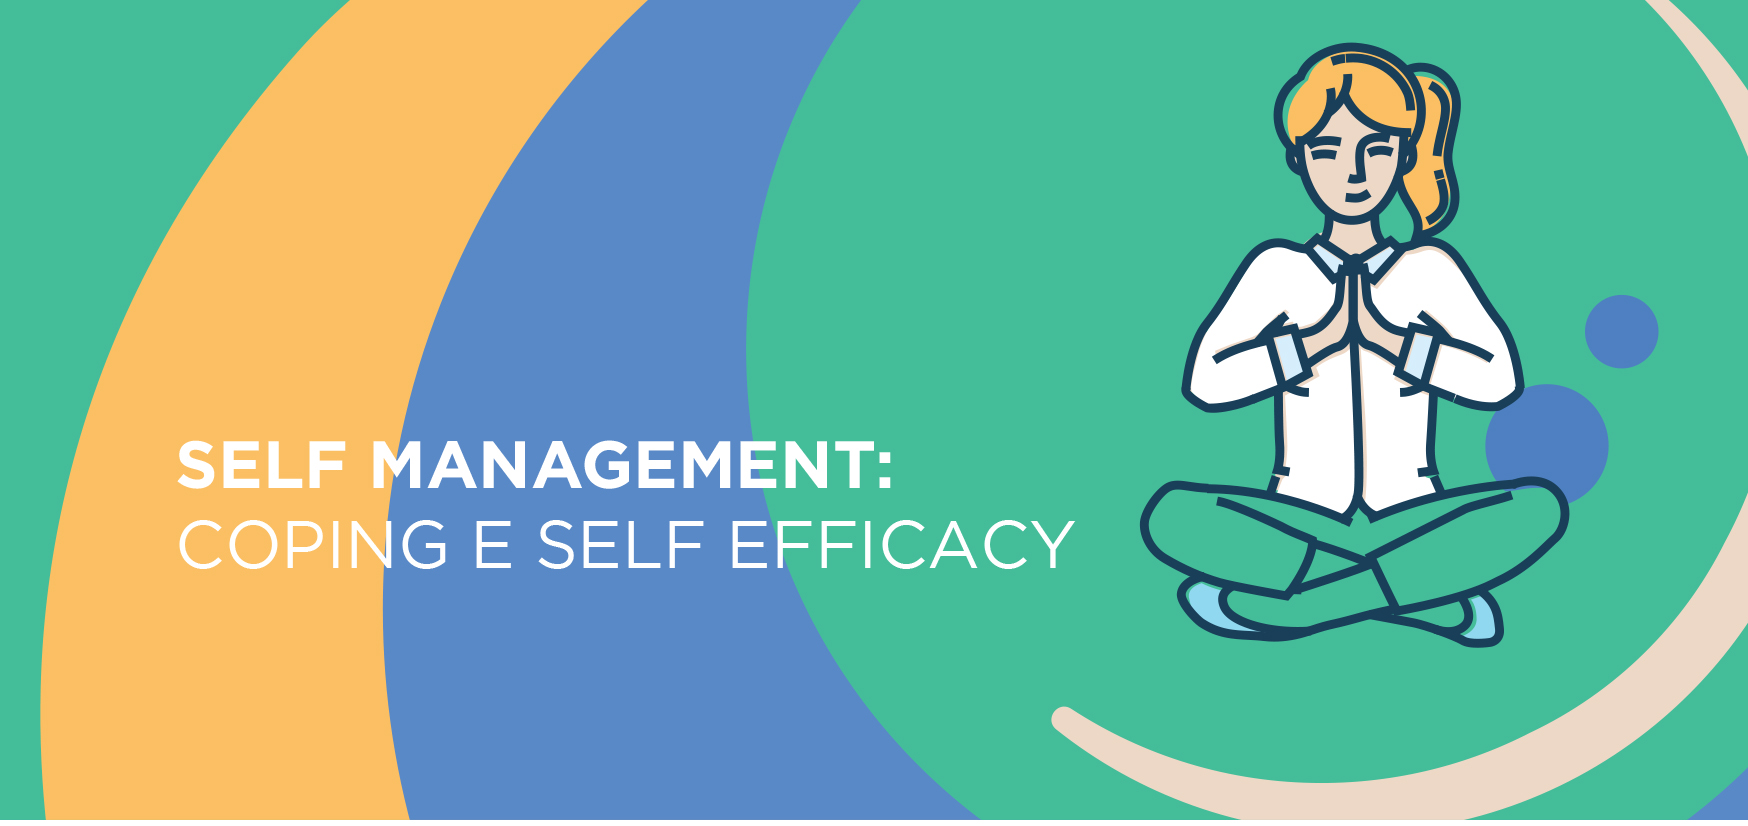 SELF MANAGEMENT:  COPING E SELF EFFICACY